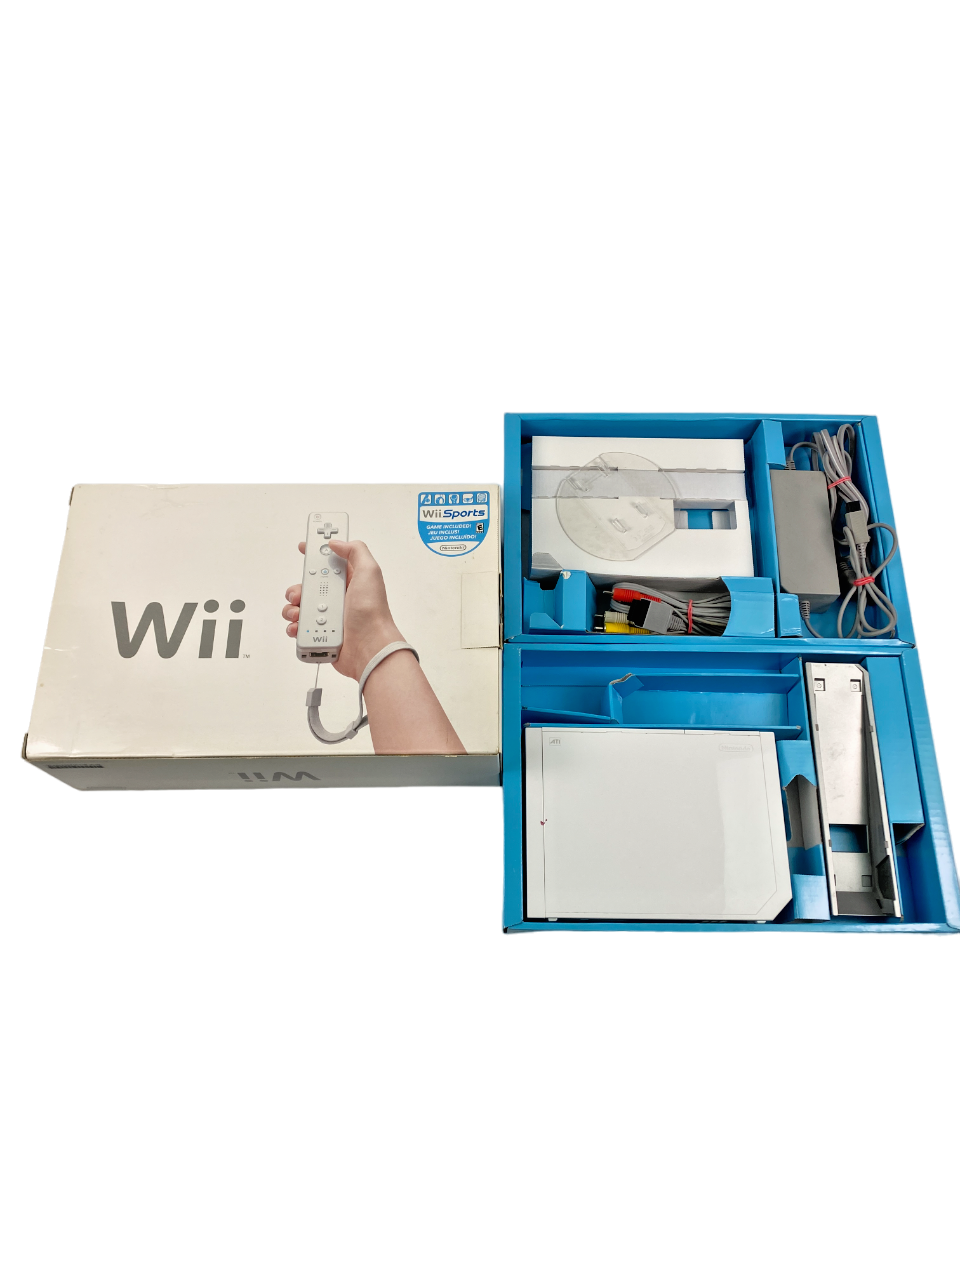 Nintendo Wii Video Game Console Model RVL-001 2006 TESTED - $47.45